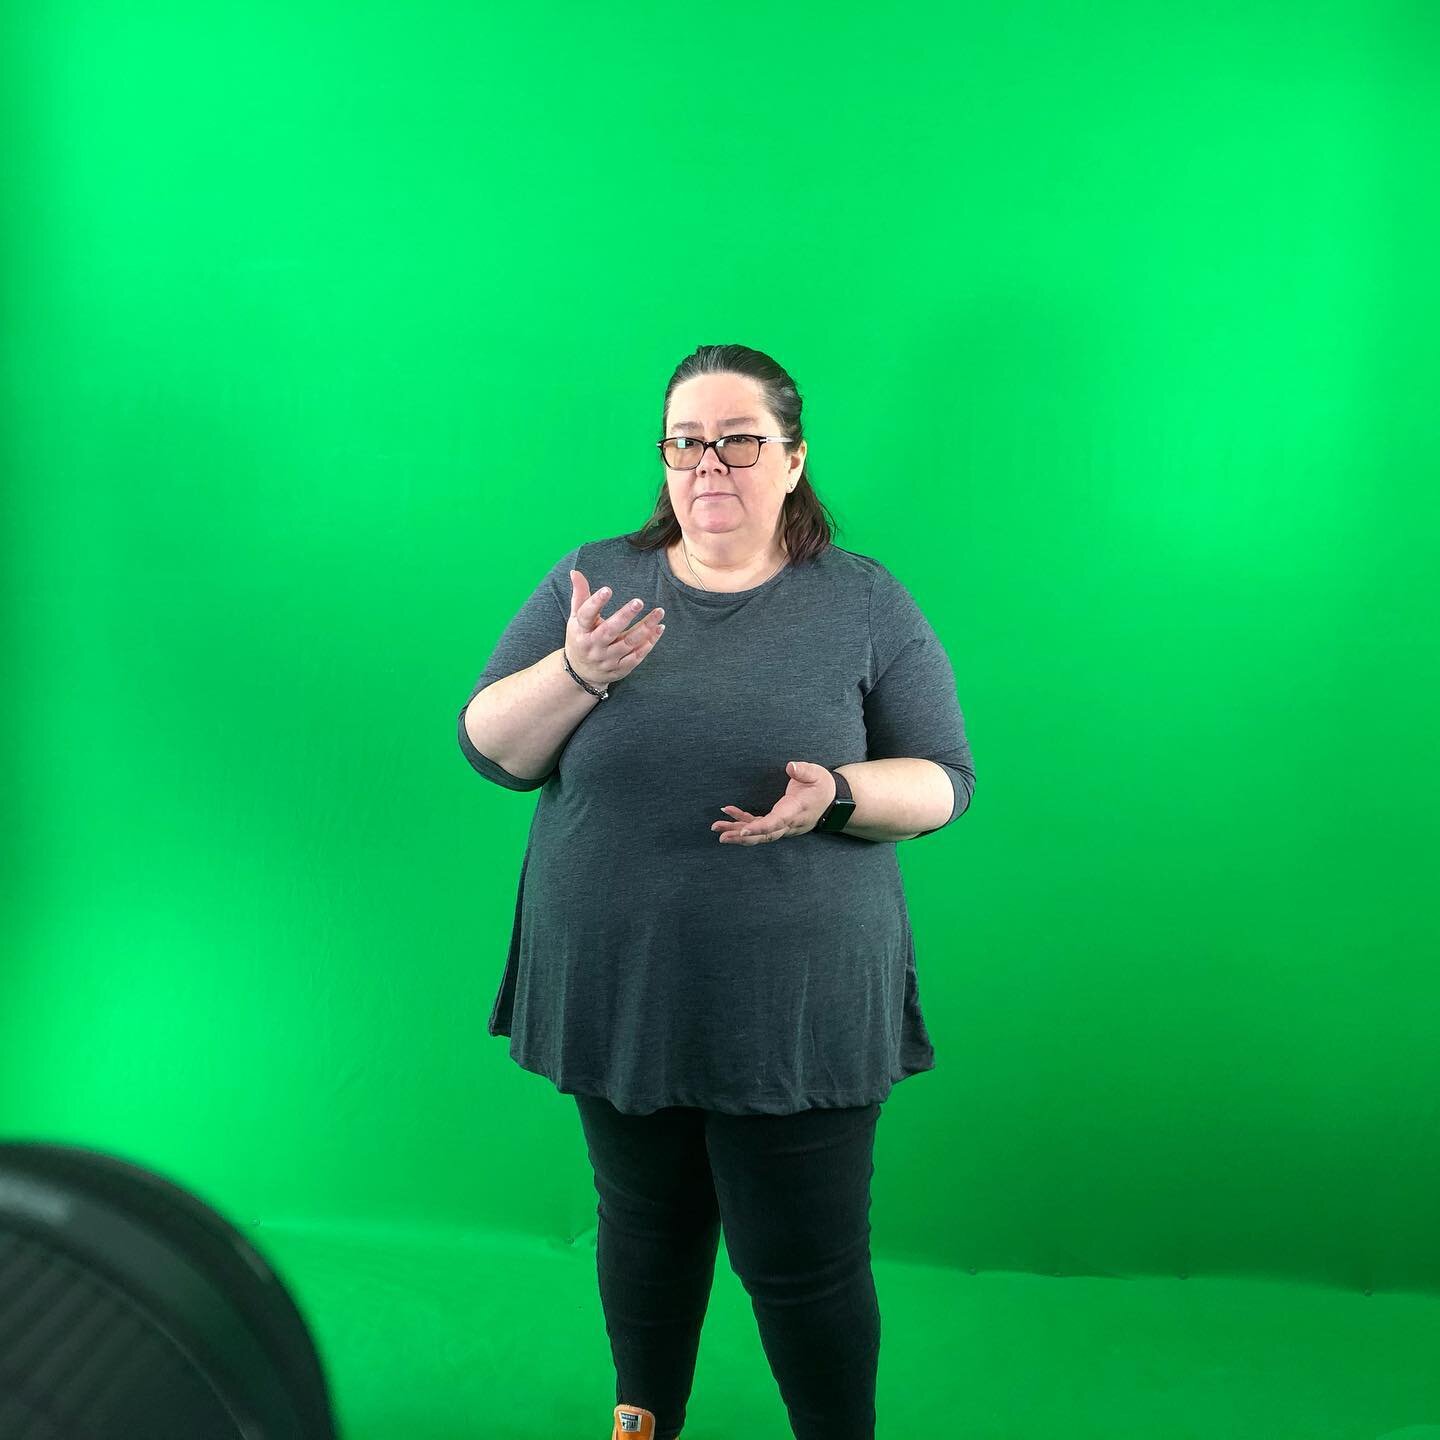 BSL filming today. Clecs Media is providing its facilities to make sure that information gets out to people who can&rsquo;t access that information about the Coronavirus. Whether people are Deaf, hard of hearing, blind, visual impaired, have an addit